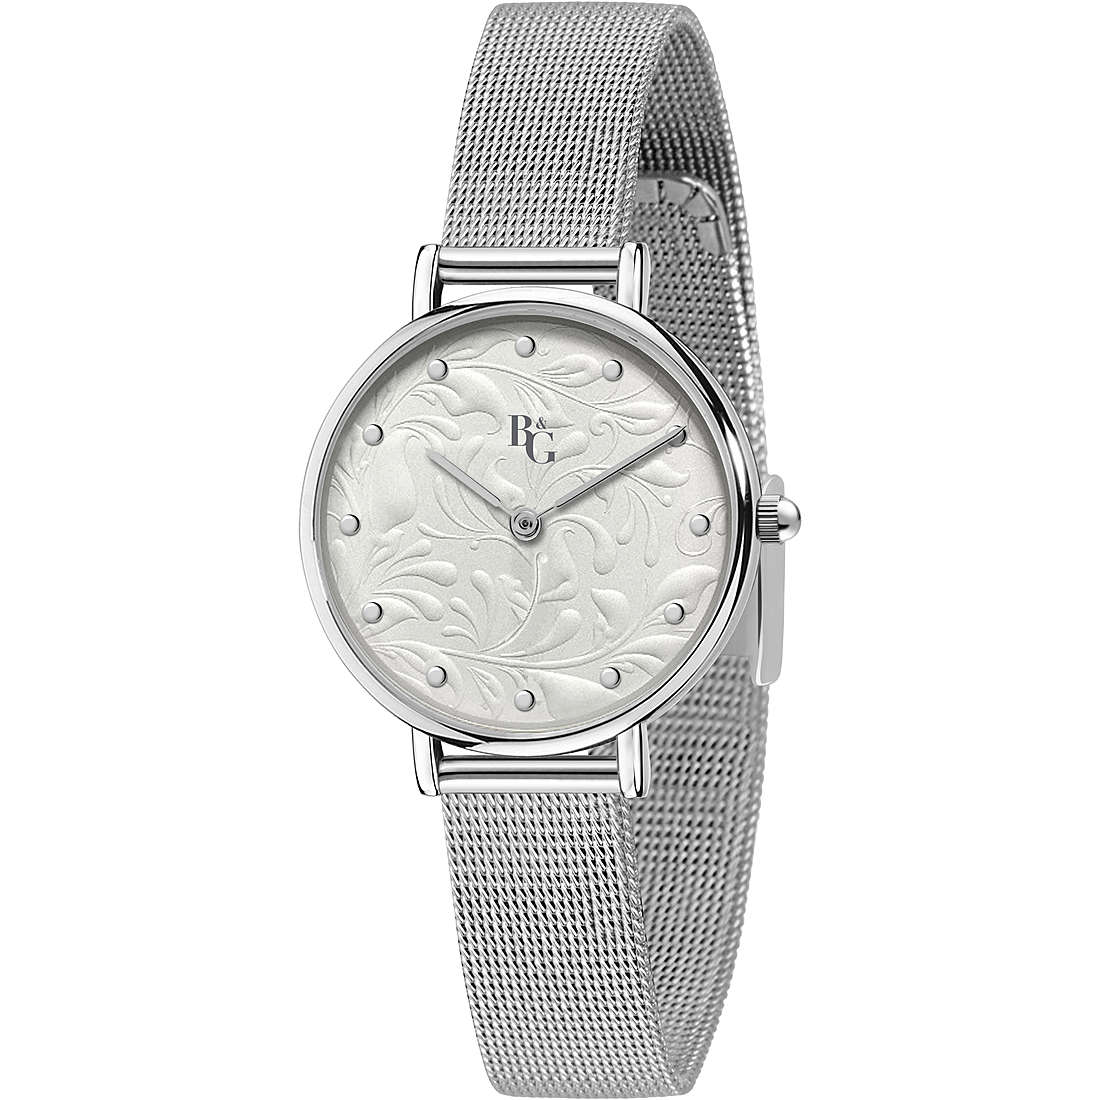 only time watch Metal Silver dial woman Preppy R3853252539